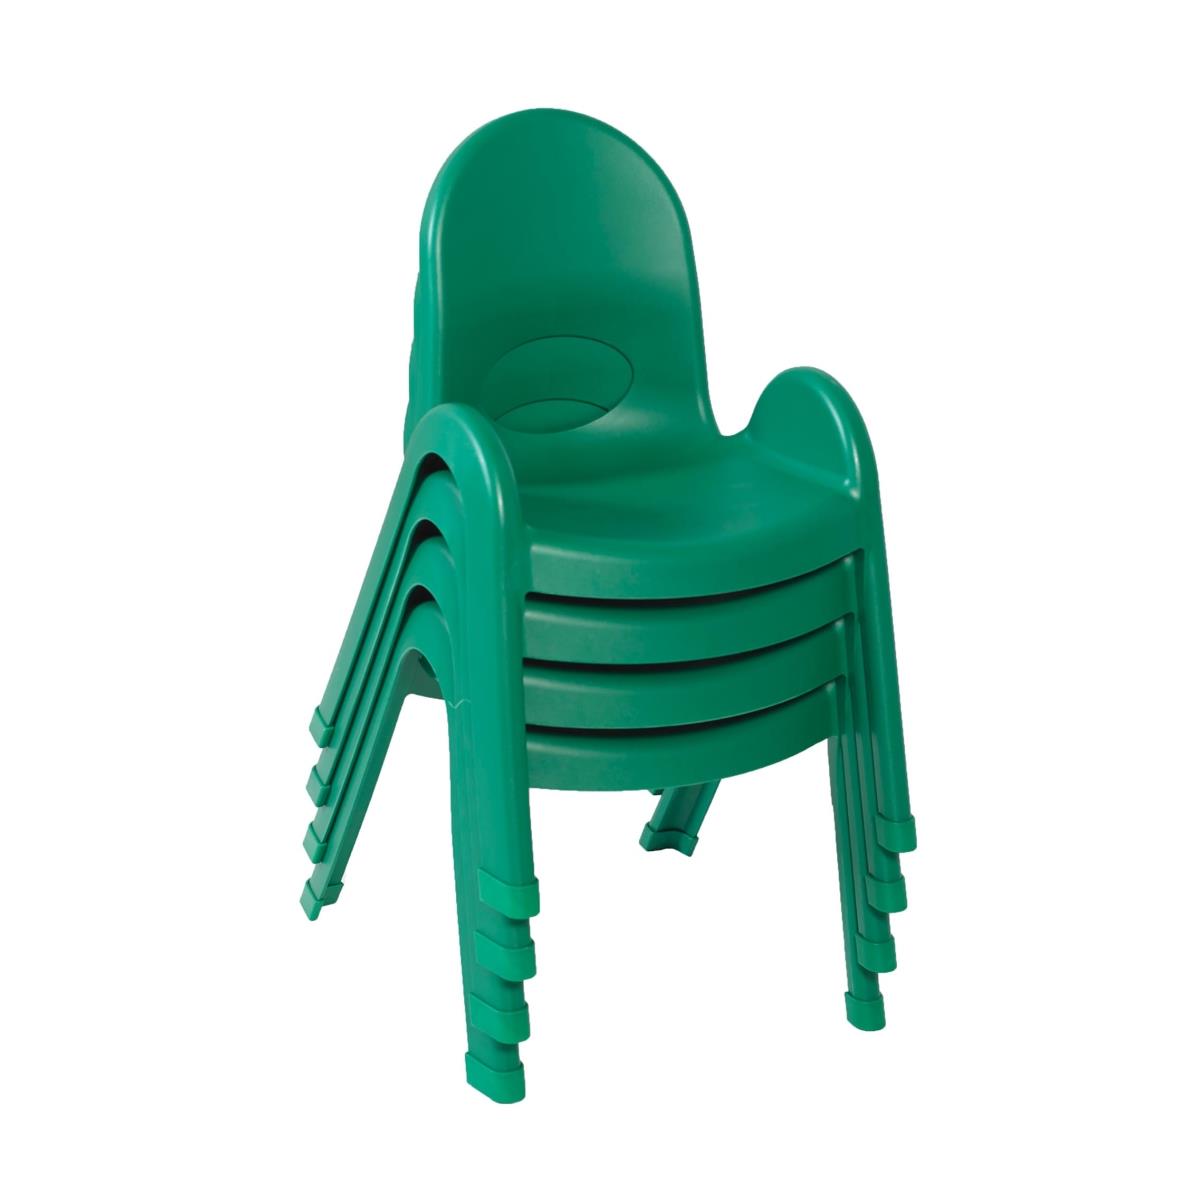 Ab7711pg4 11 In. Value Stack Child Chair, Shamrock Green - Pack Of 4